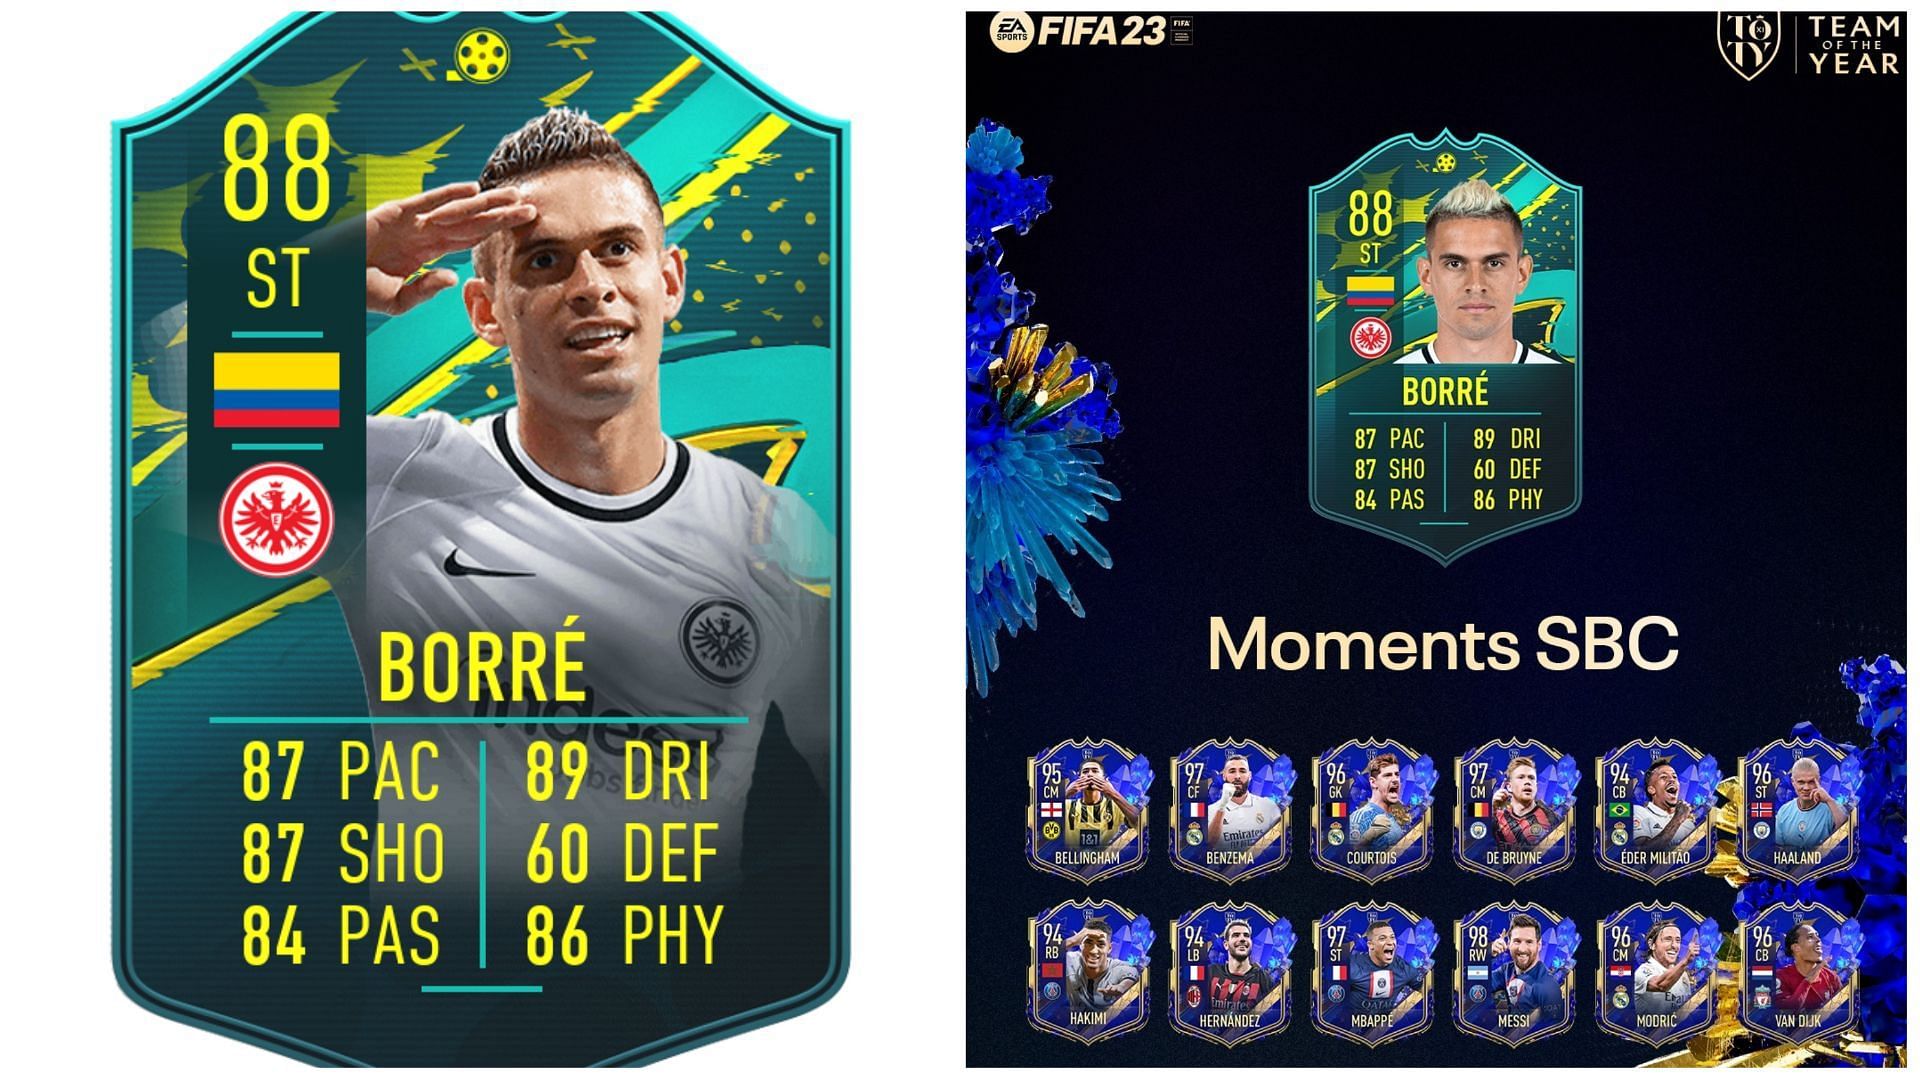 Rafael Borre has received a special card in FIFA 23 (Images via EA Sports)